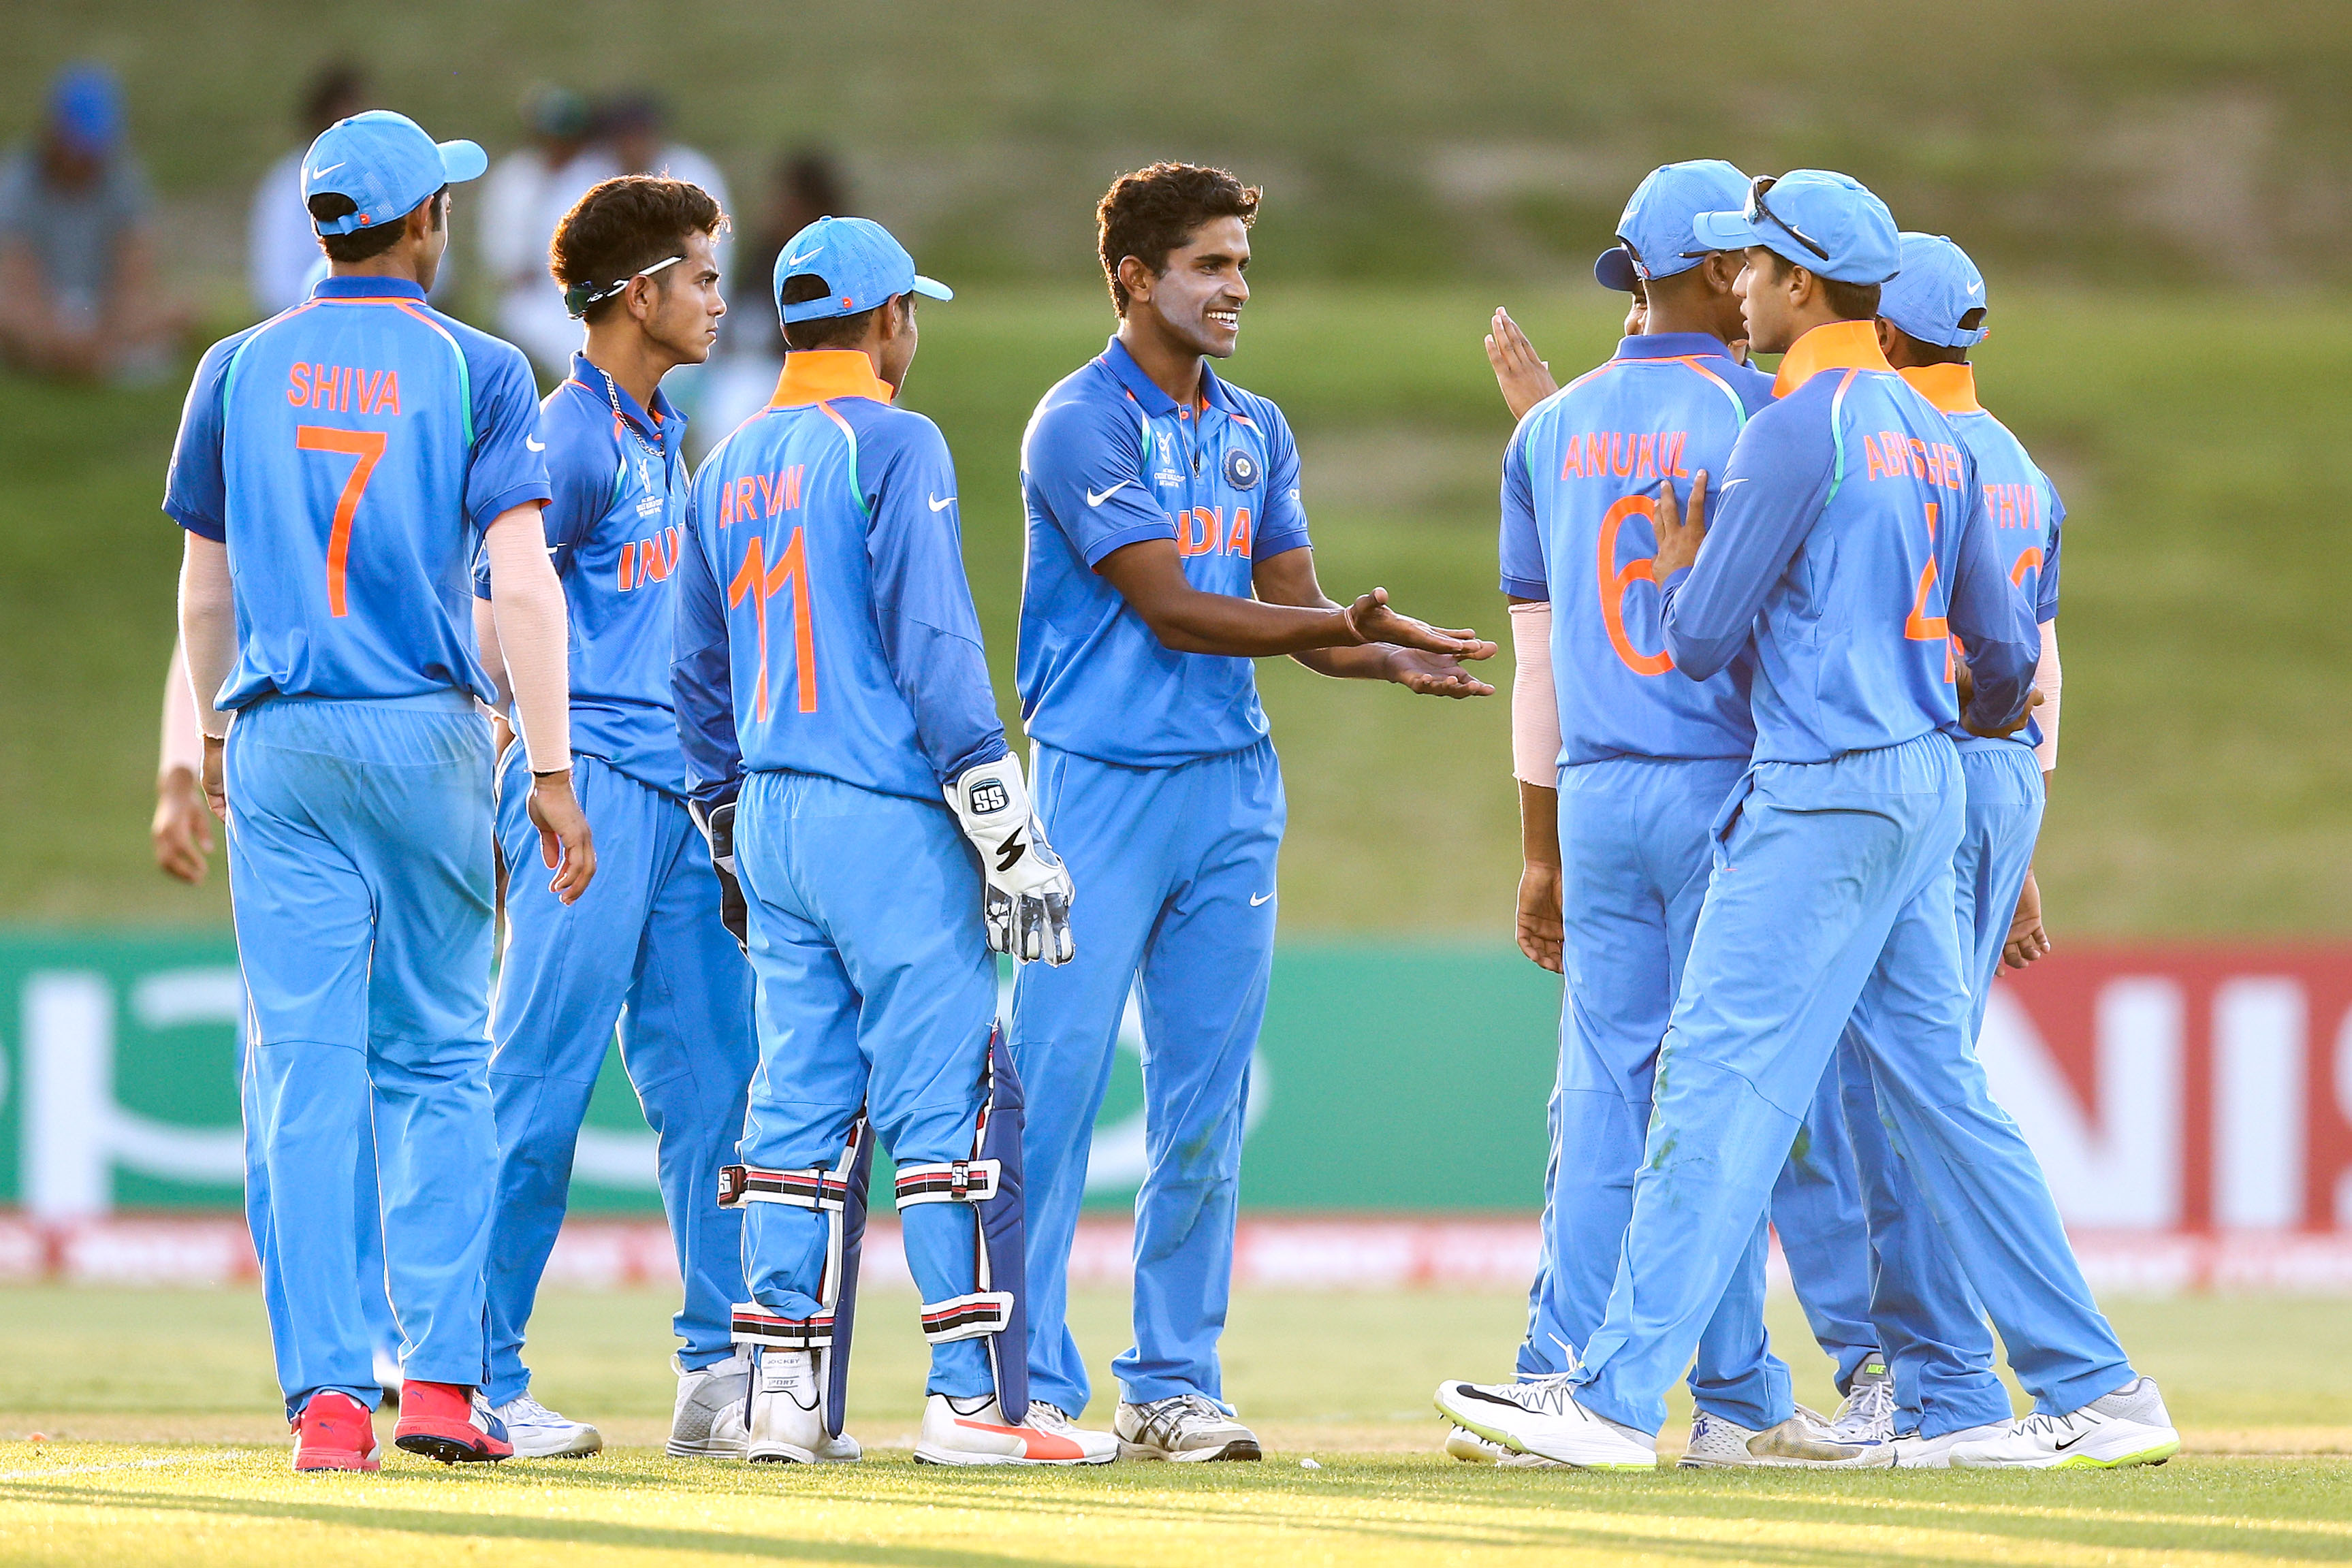 SHAW AND KALRA SCRIPT EASY WIN FOR INDIA OVER AUSTRALIA